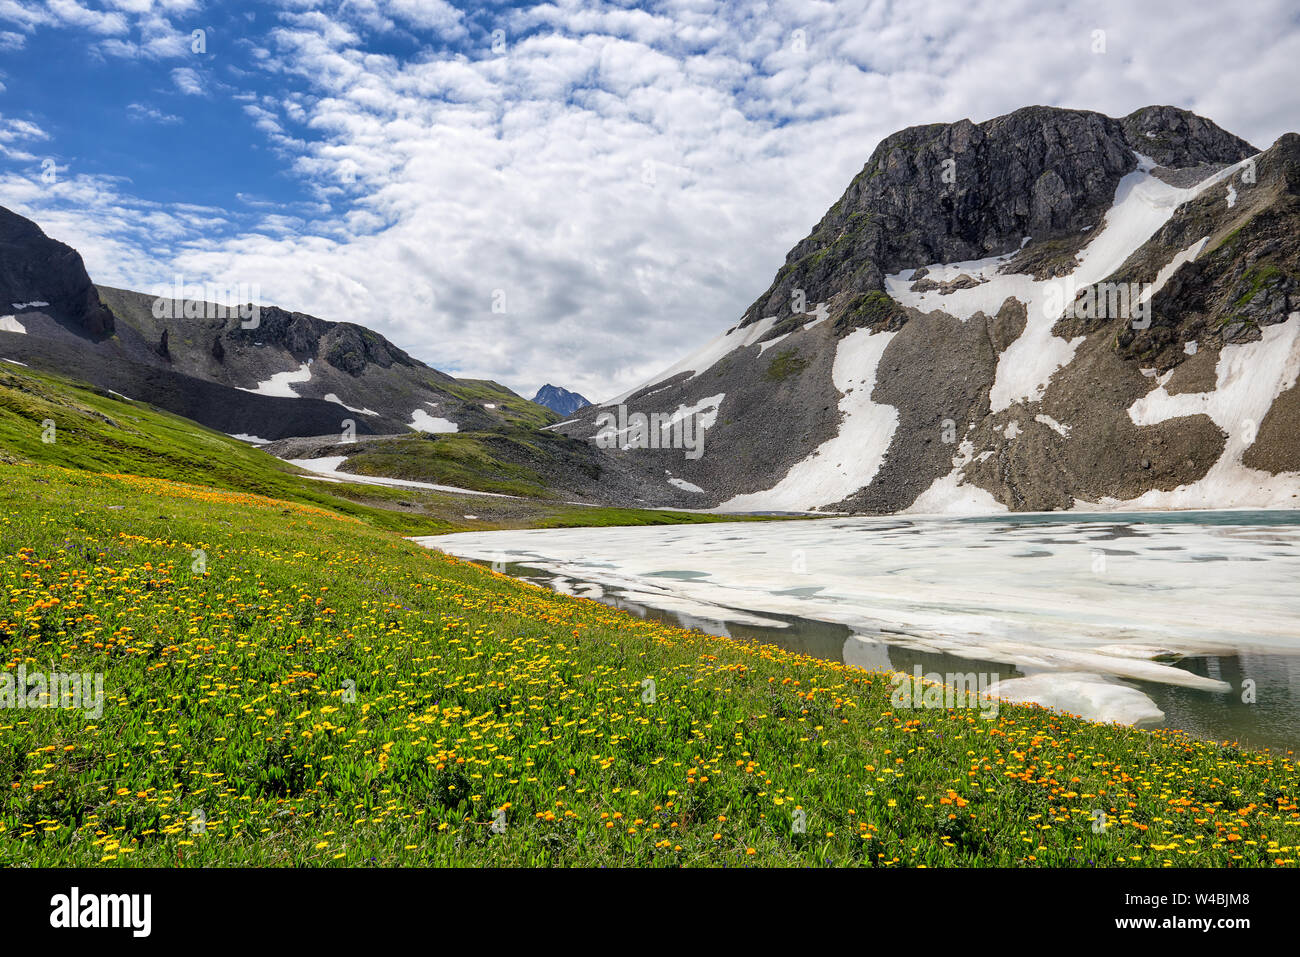 Blooming alpine meadow next to ice of mountain lake. July. Tyva Republic. Central Asia Stock Photo